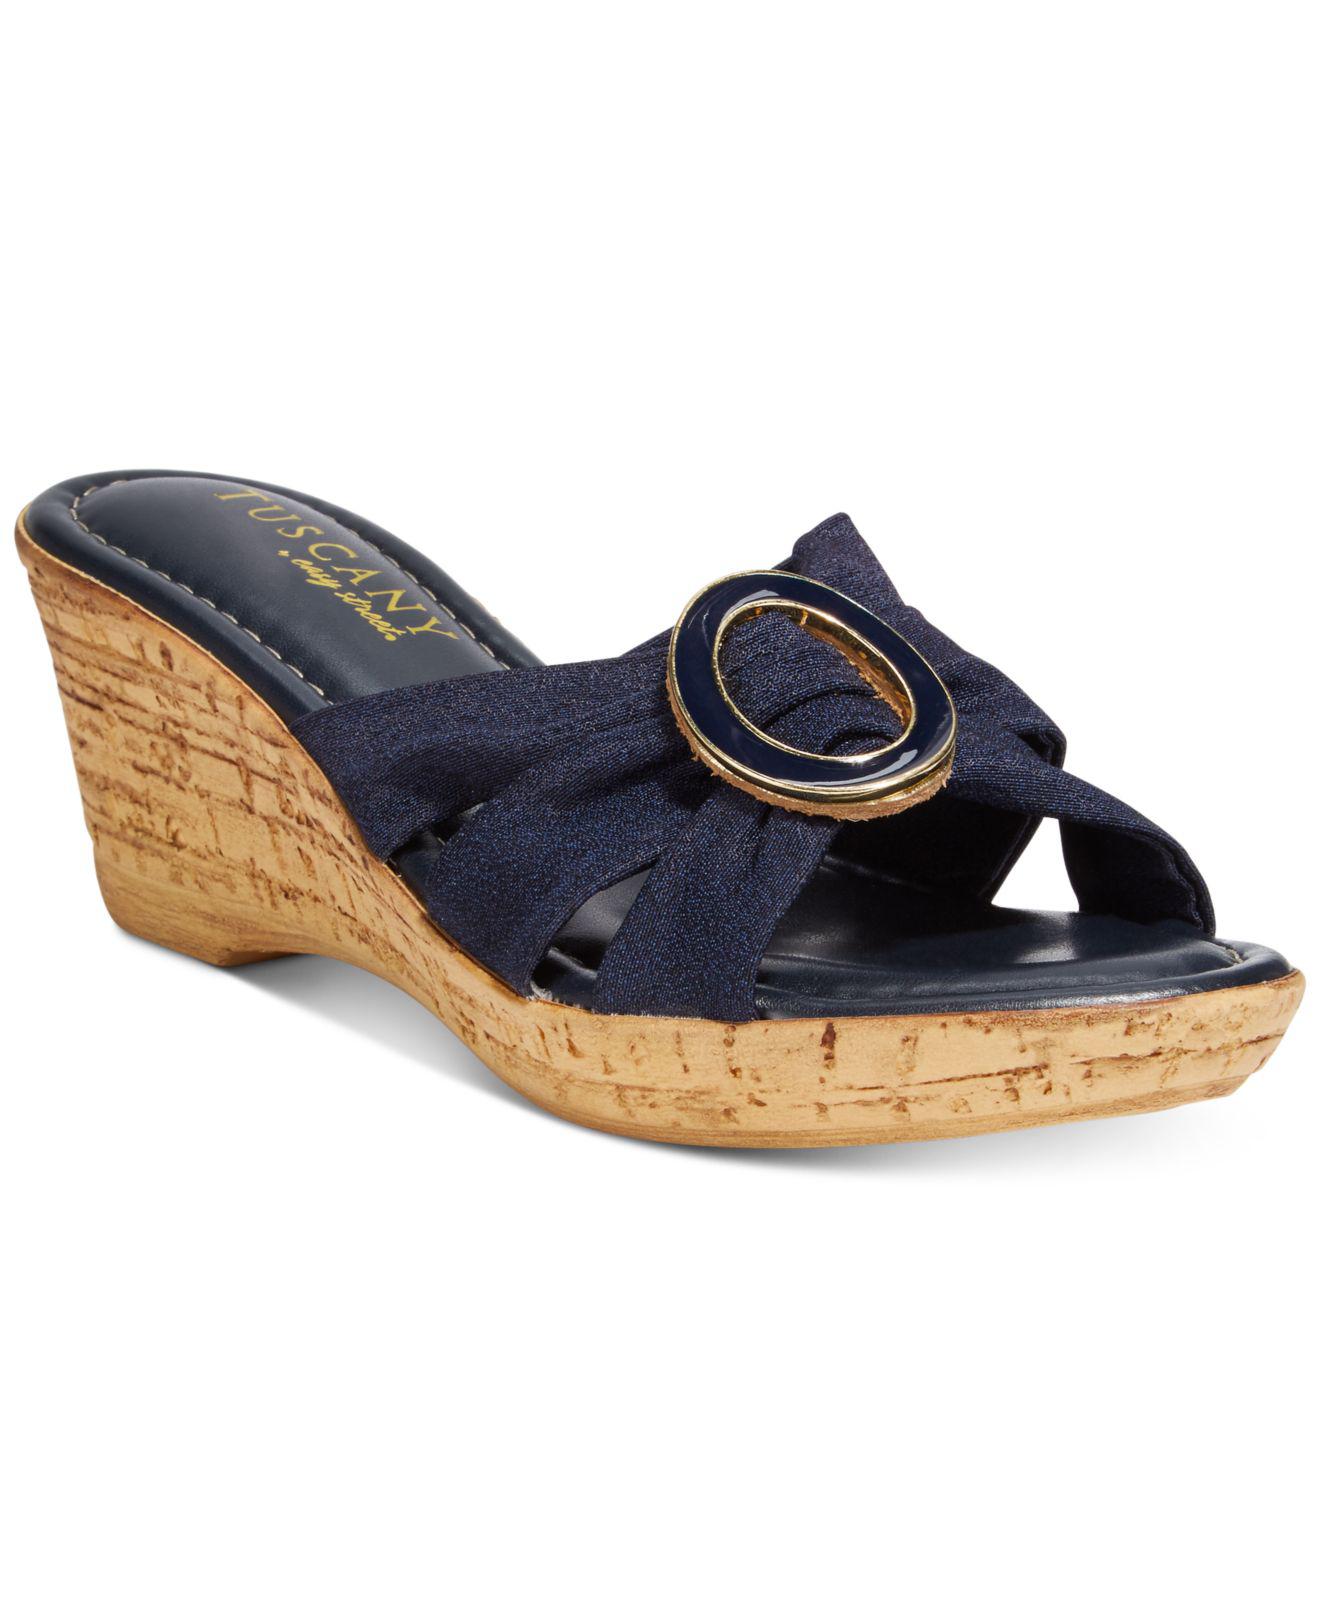 Easy Street Tuscany Conca Wedge Sandals in Navy (Blue) - Lyst